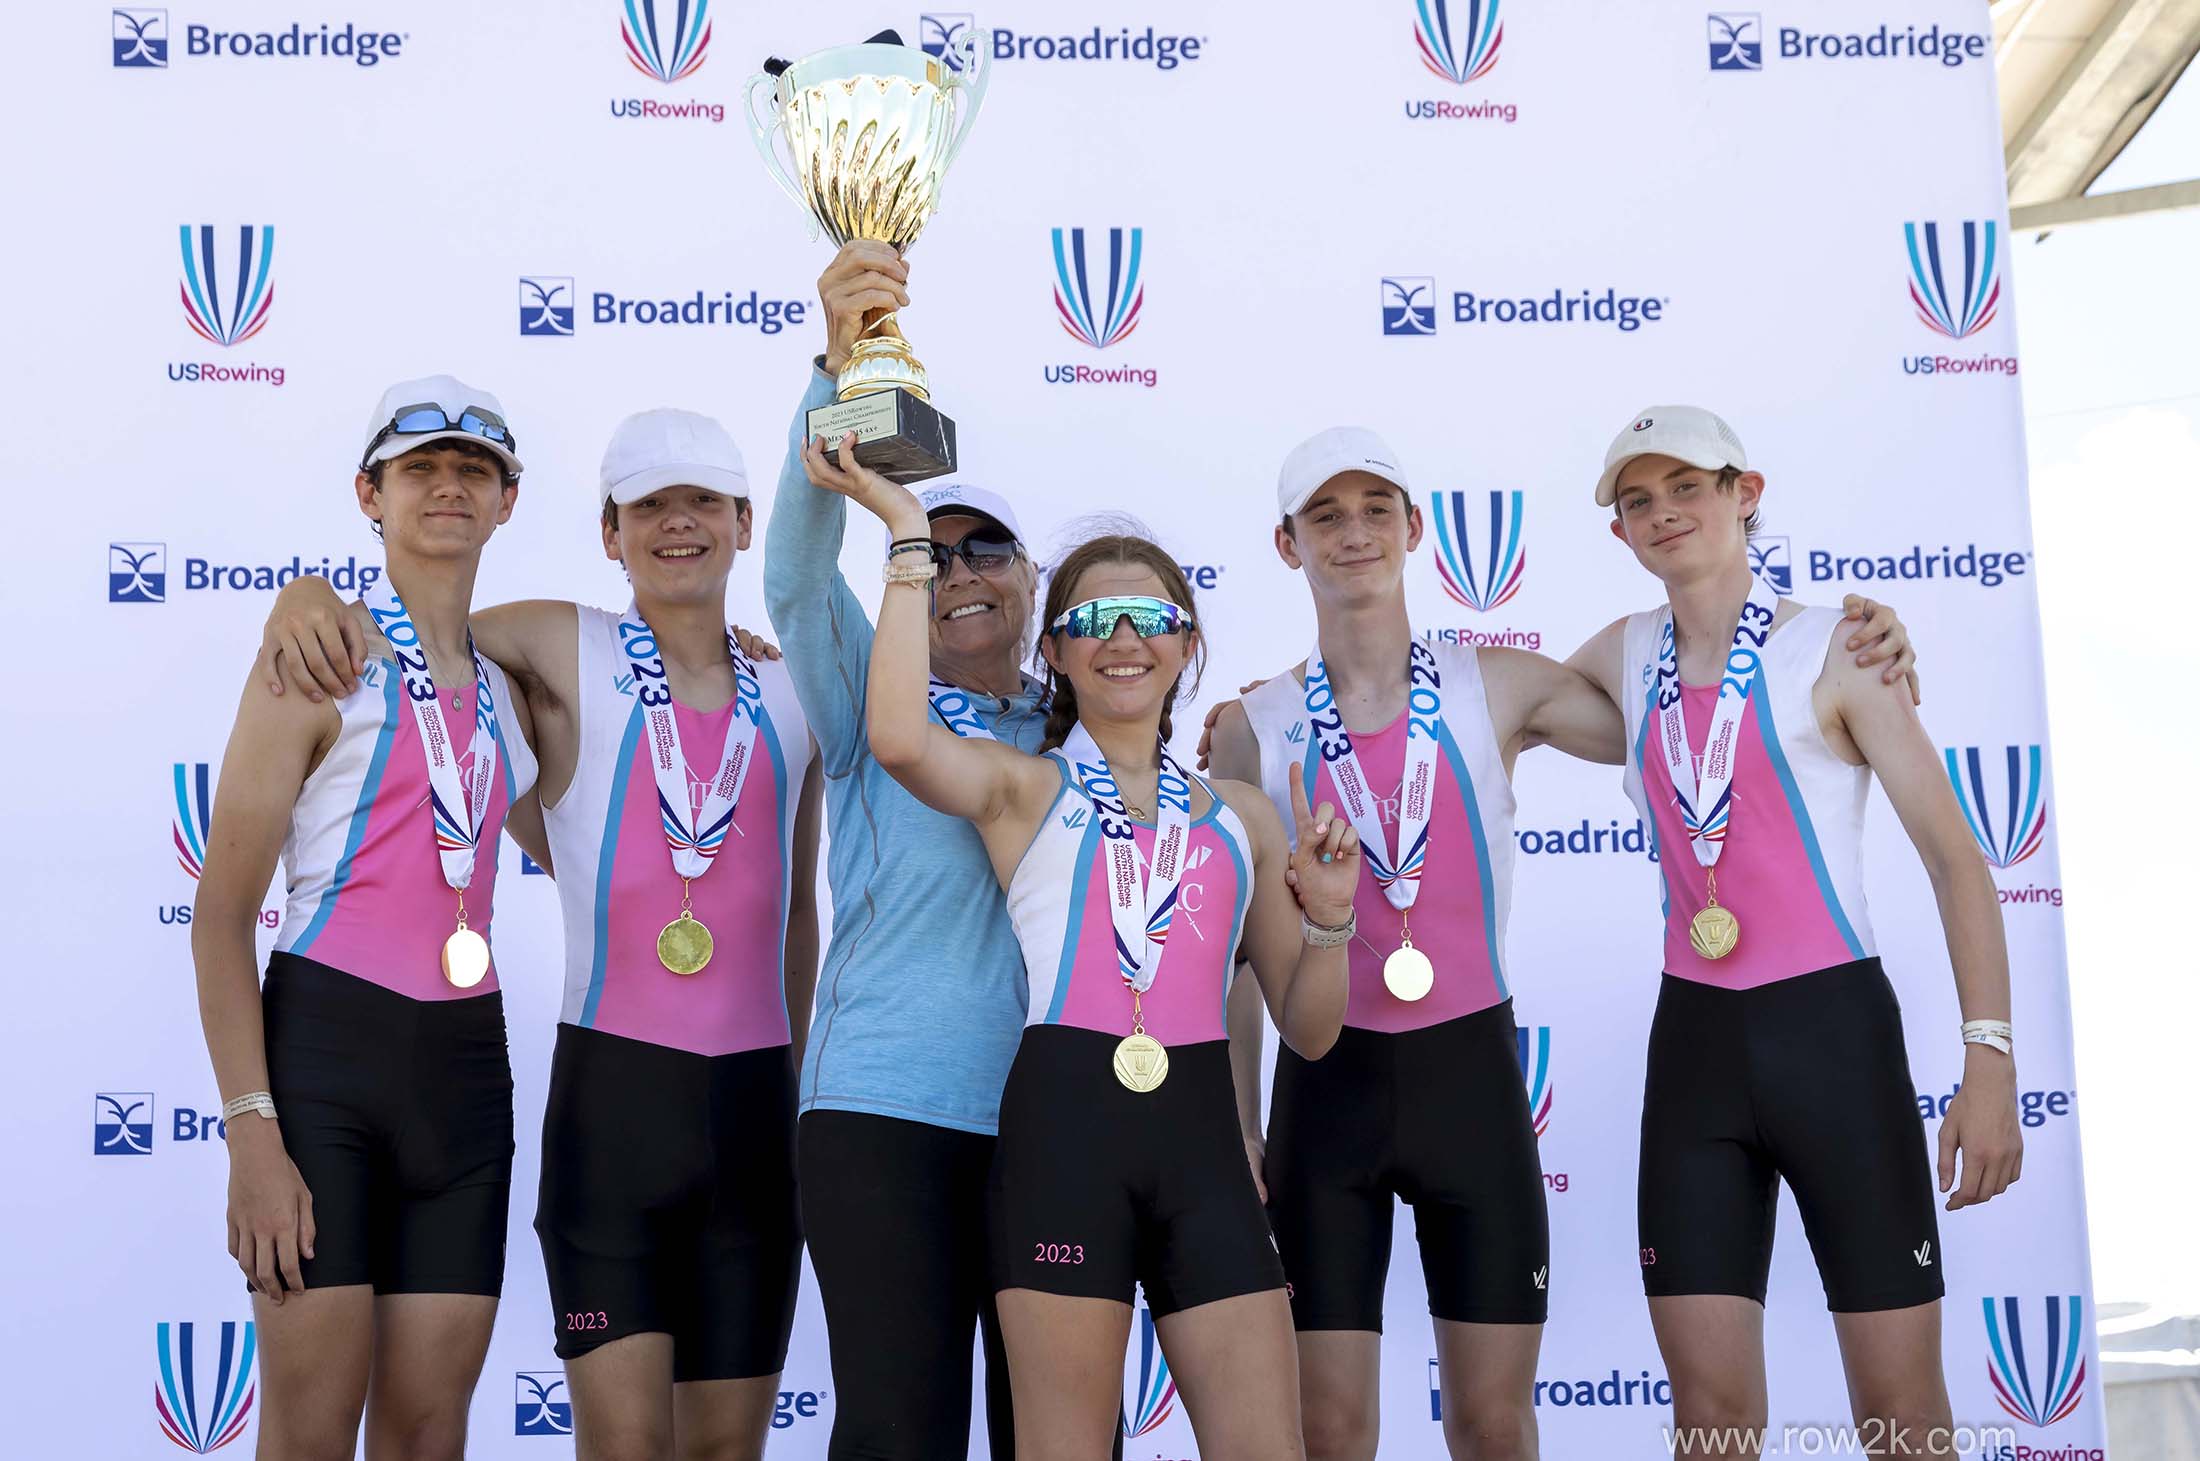 Men’s Youth U15 Coxed Quad - First Place, pictured from Left to right: Declan McClure, Andrew Quaglina, Head Coach Olga Vengerovskaya, Elizabeth Zyarska, Declan Crotty, Charles McGillion-Moore